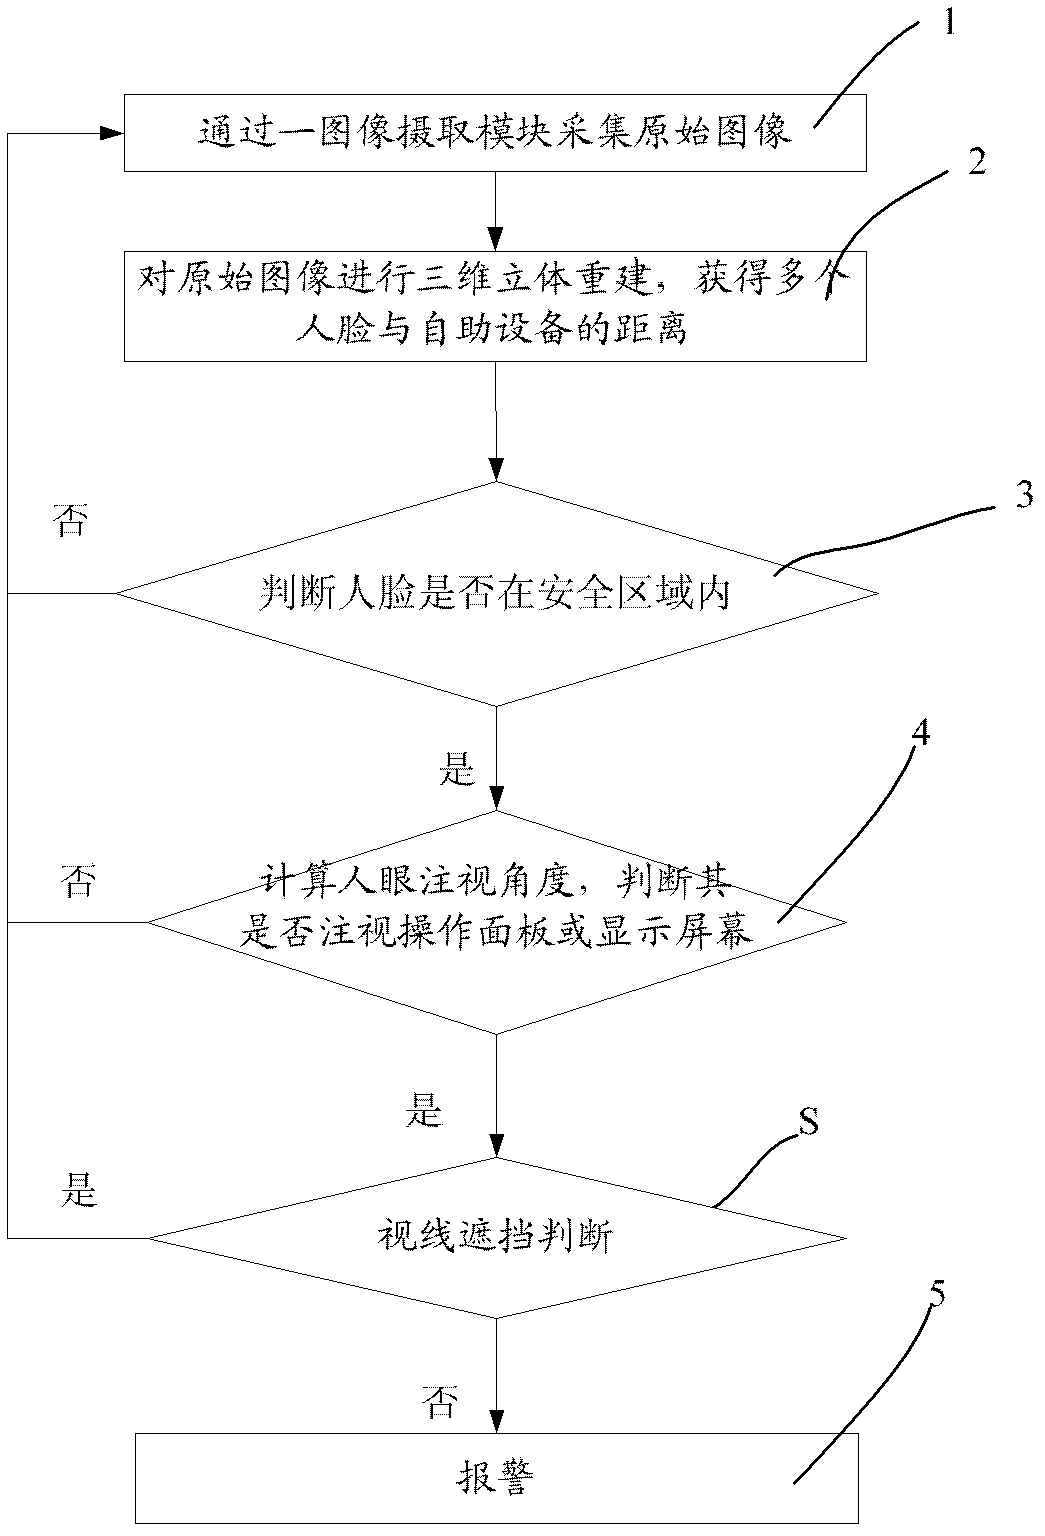 Financial self-service device and anti-peeping system and anti-peeping method thereof